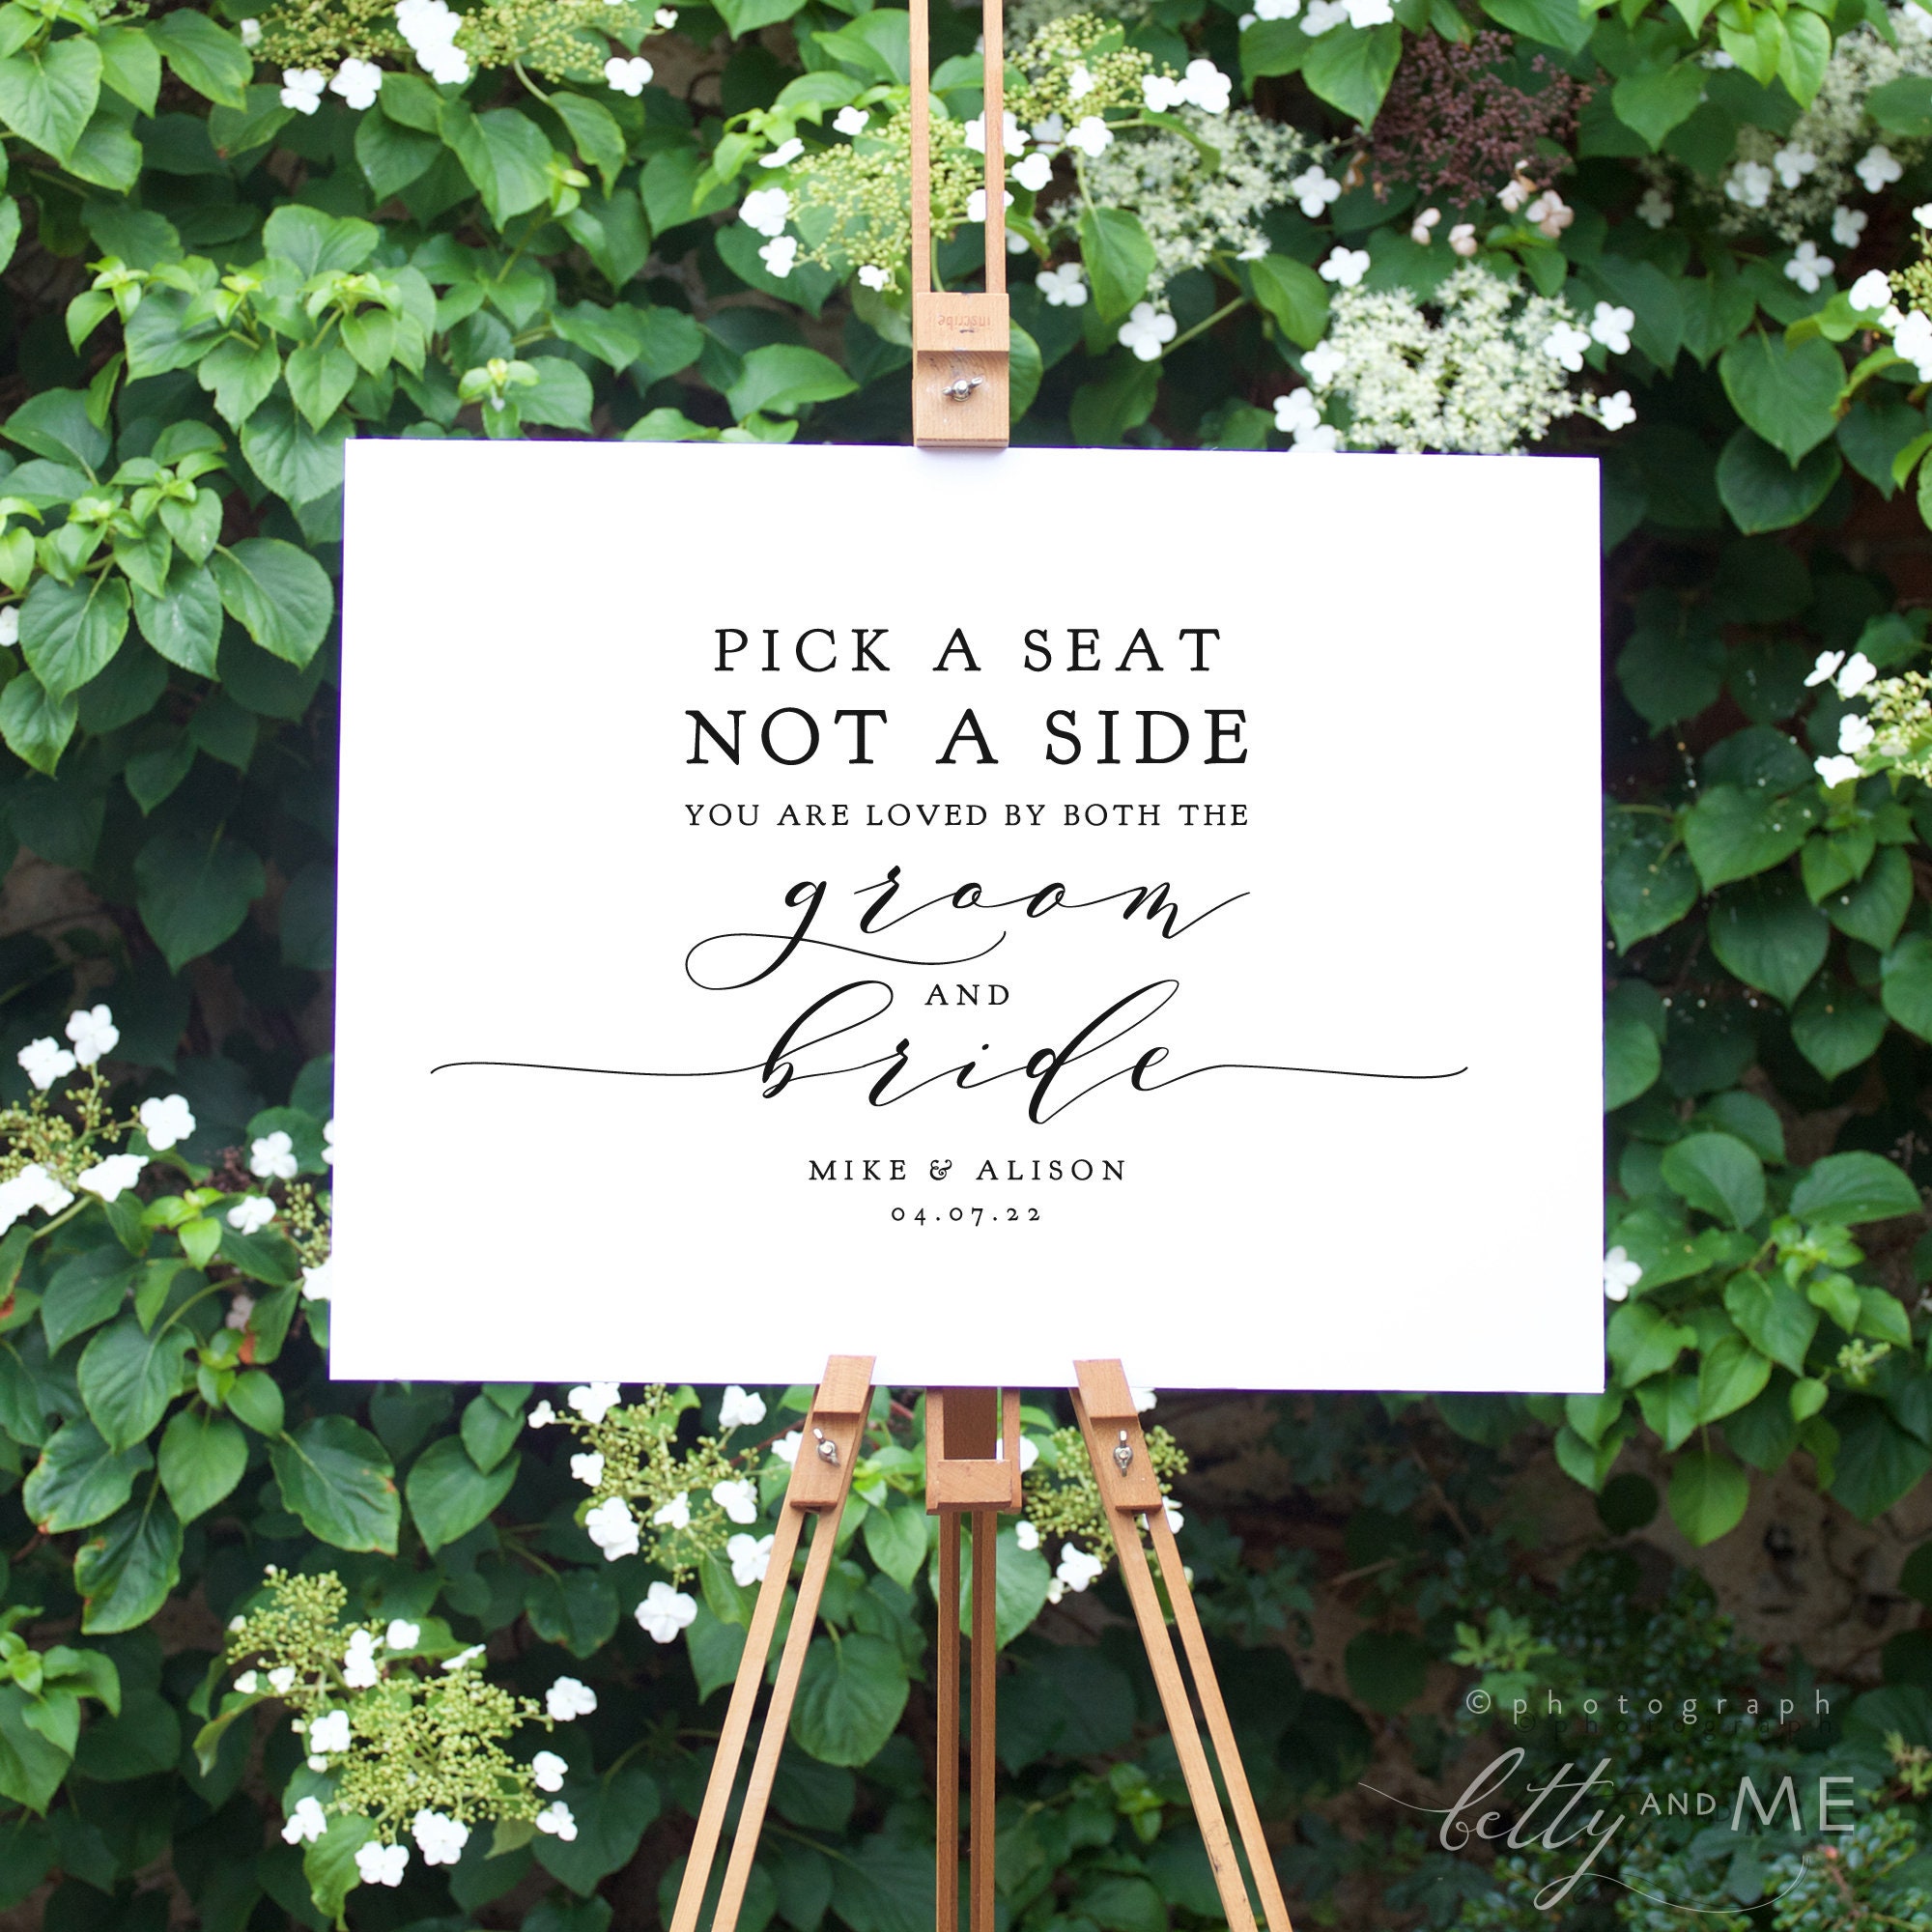 JennyGems Pick A Seat Not A Side Sign You Are Loved by The Groom and Bride, Wedding Signs and Decor for Ceremony, Brown Directional Signage, Made in